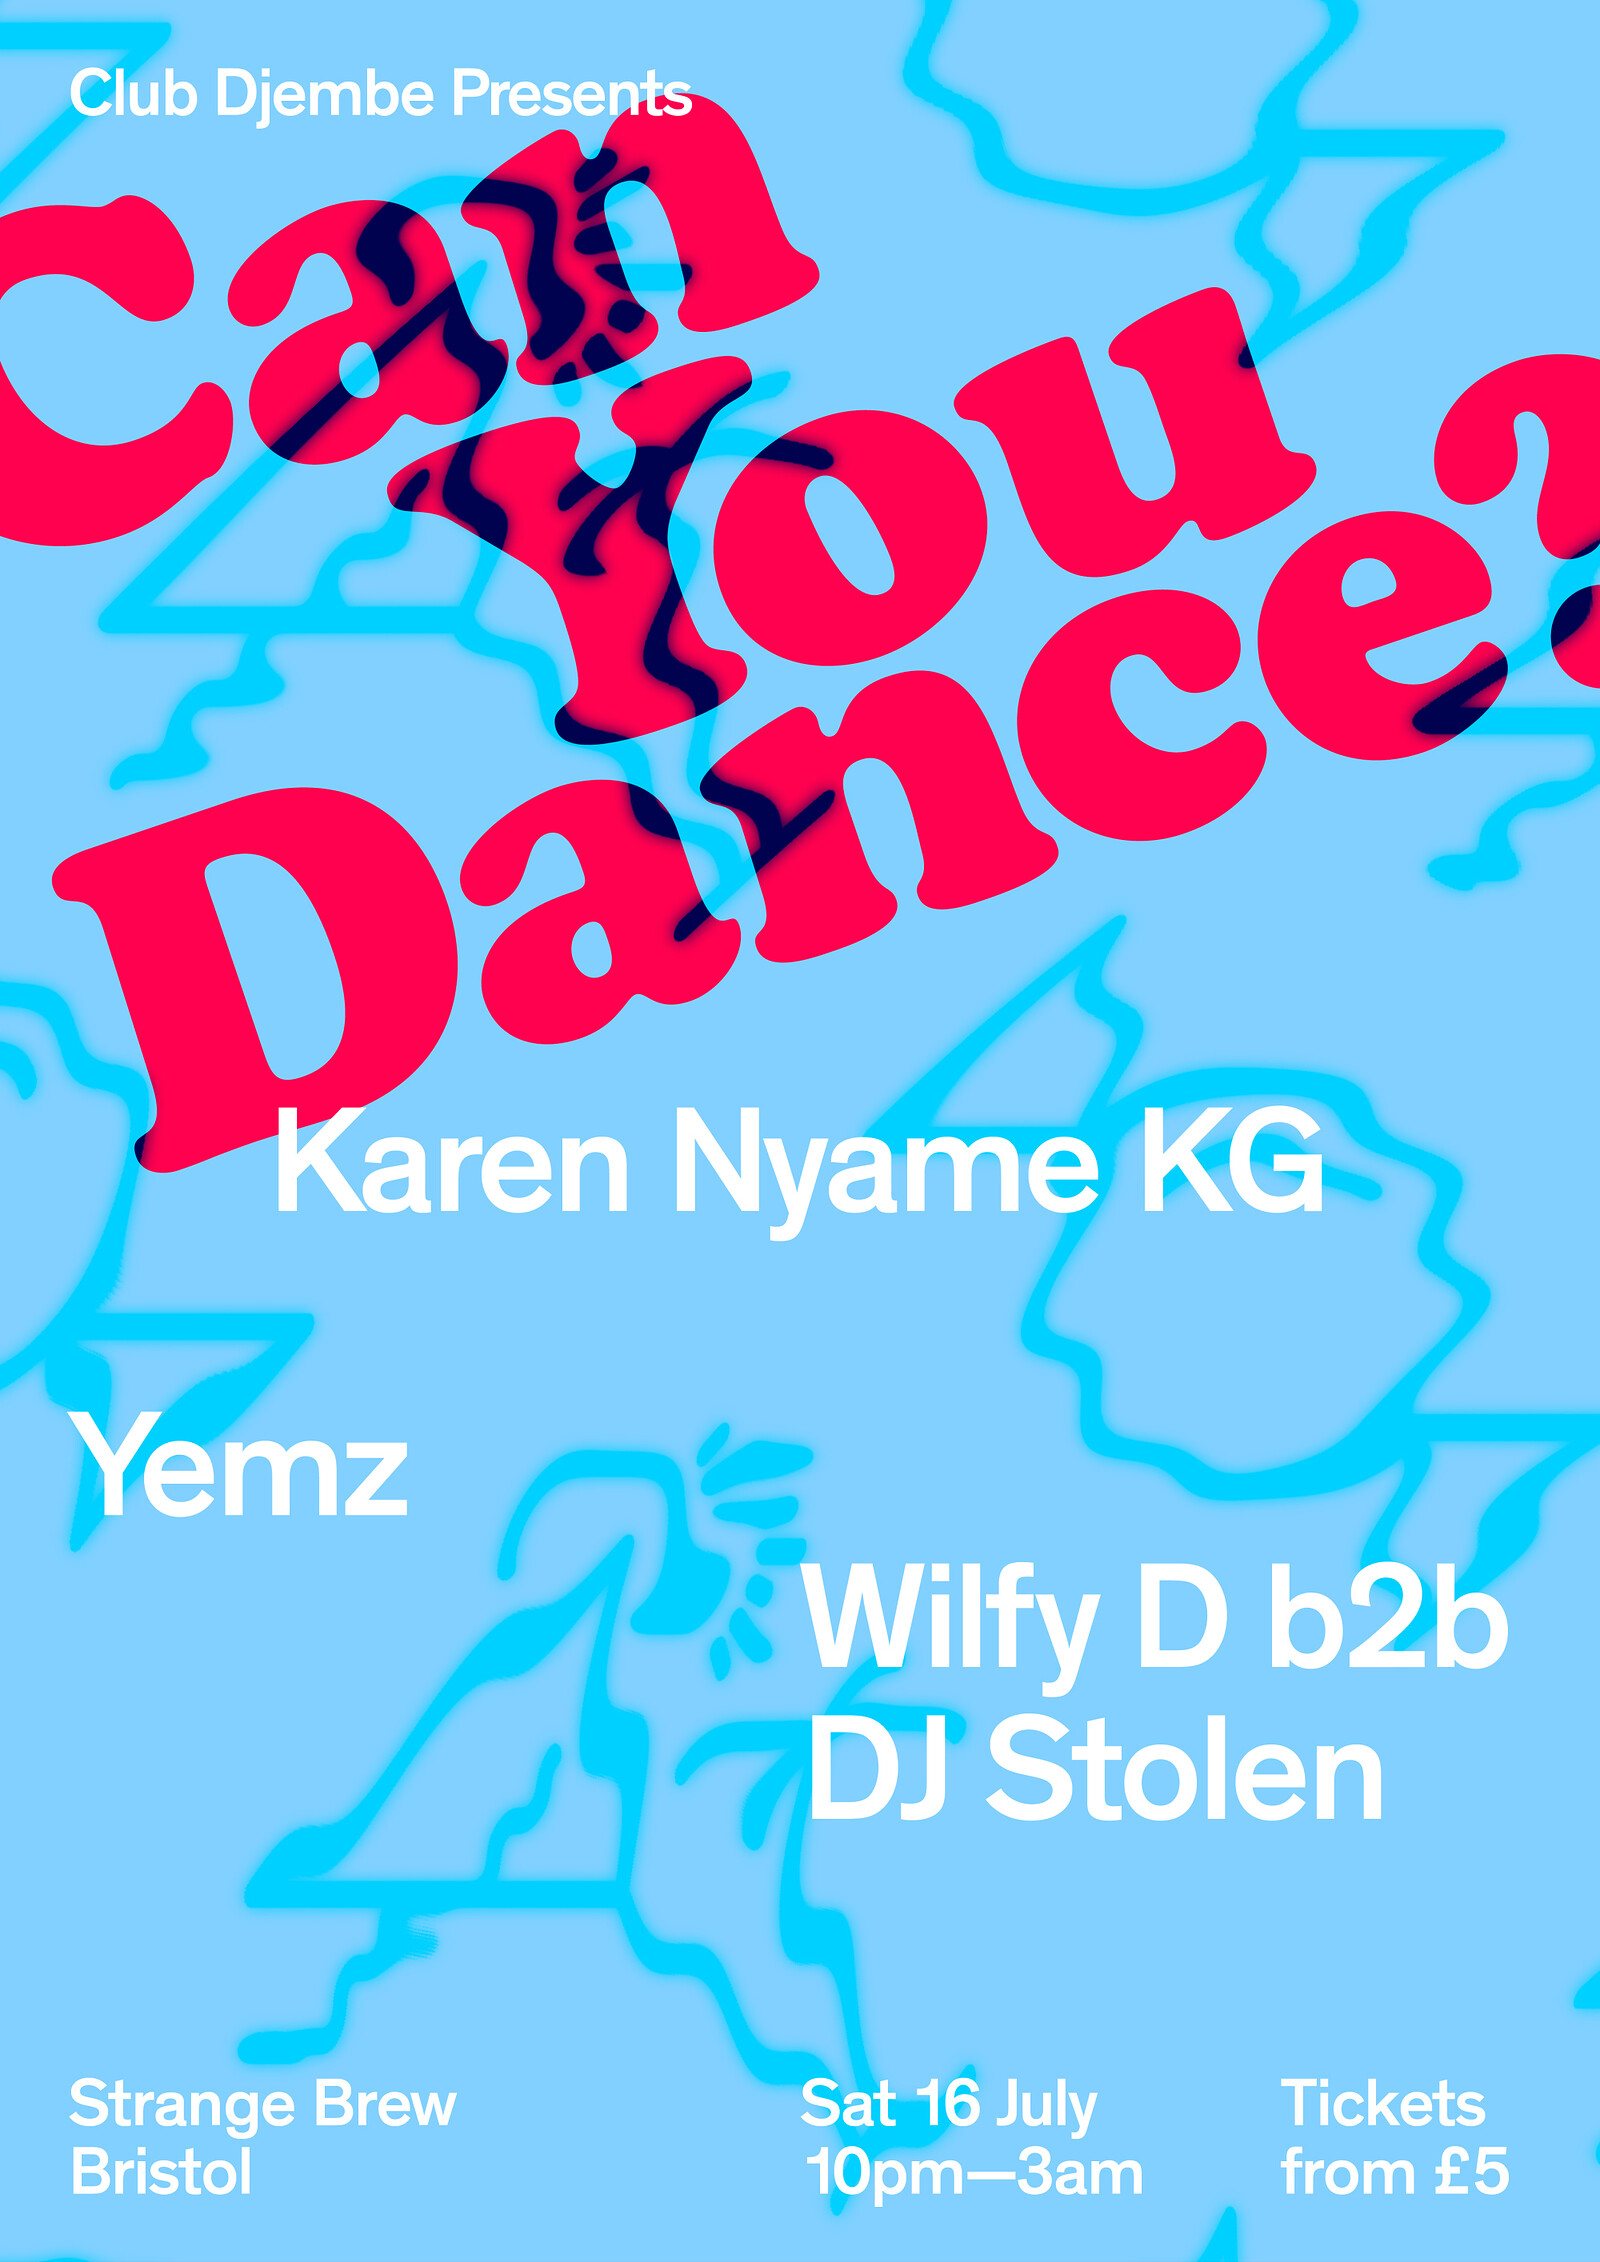 Club Djembe Presents: Can You Dance? at Strange Brew